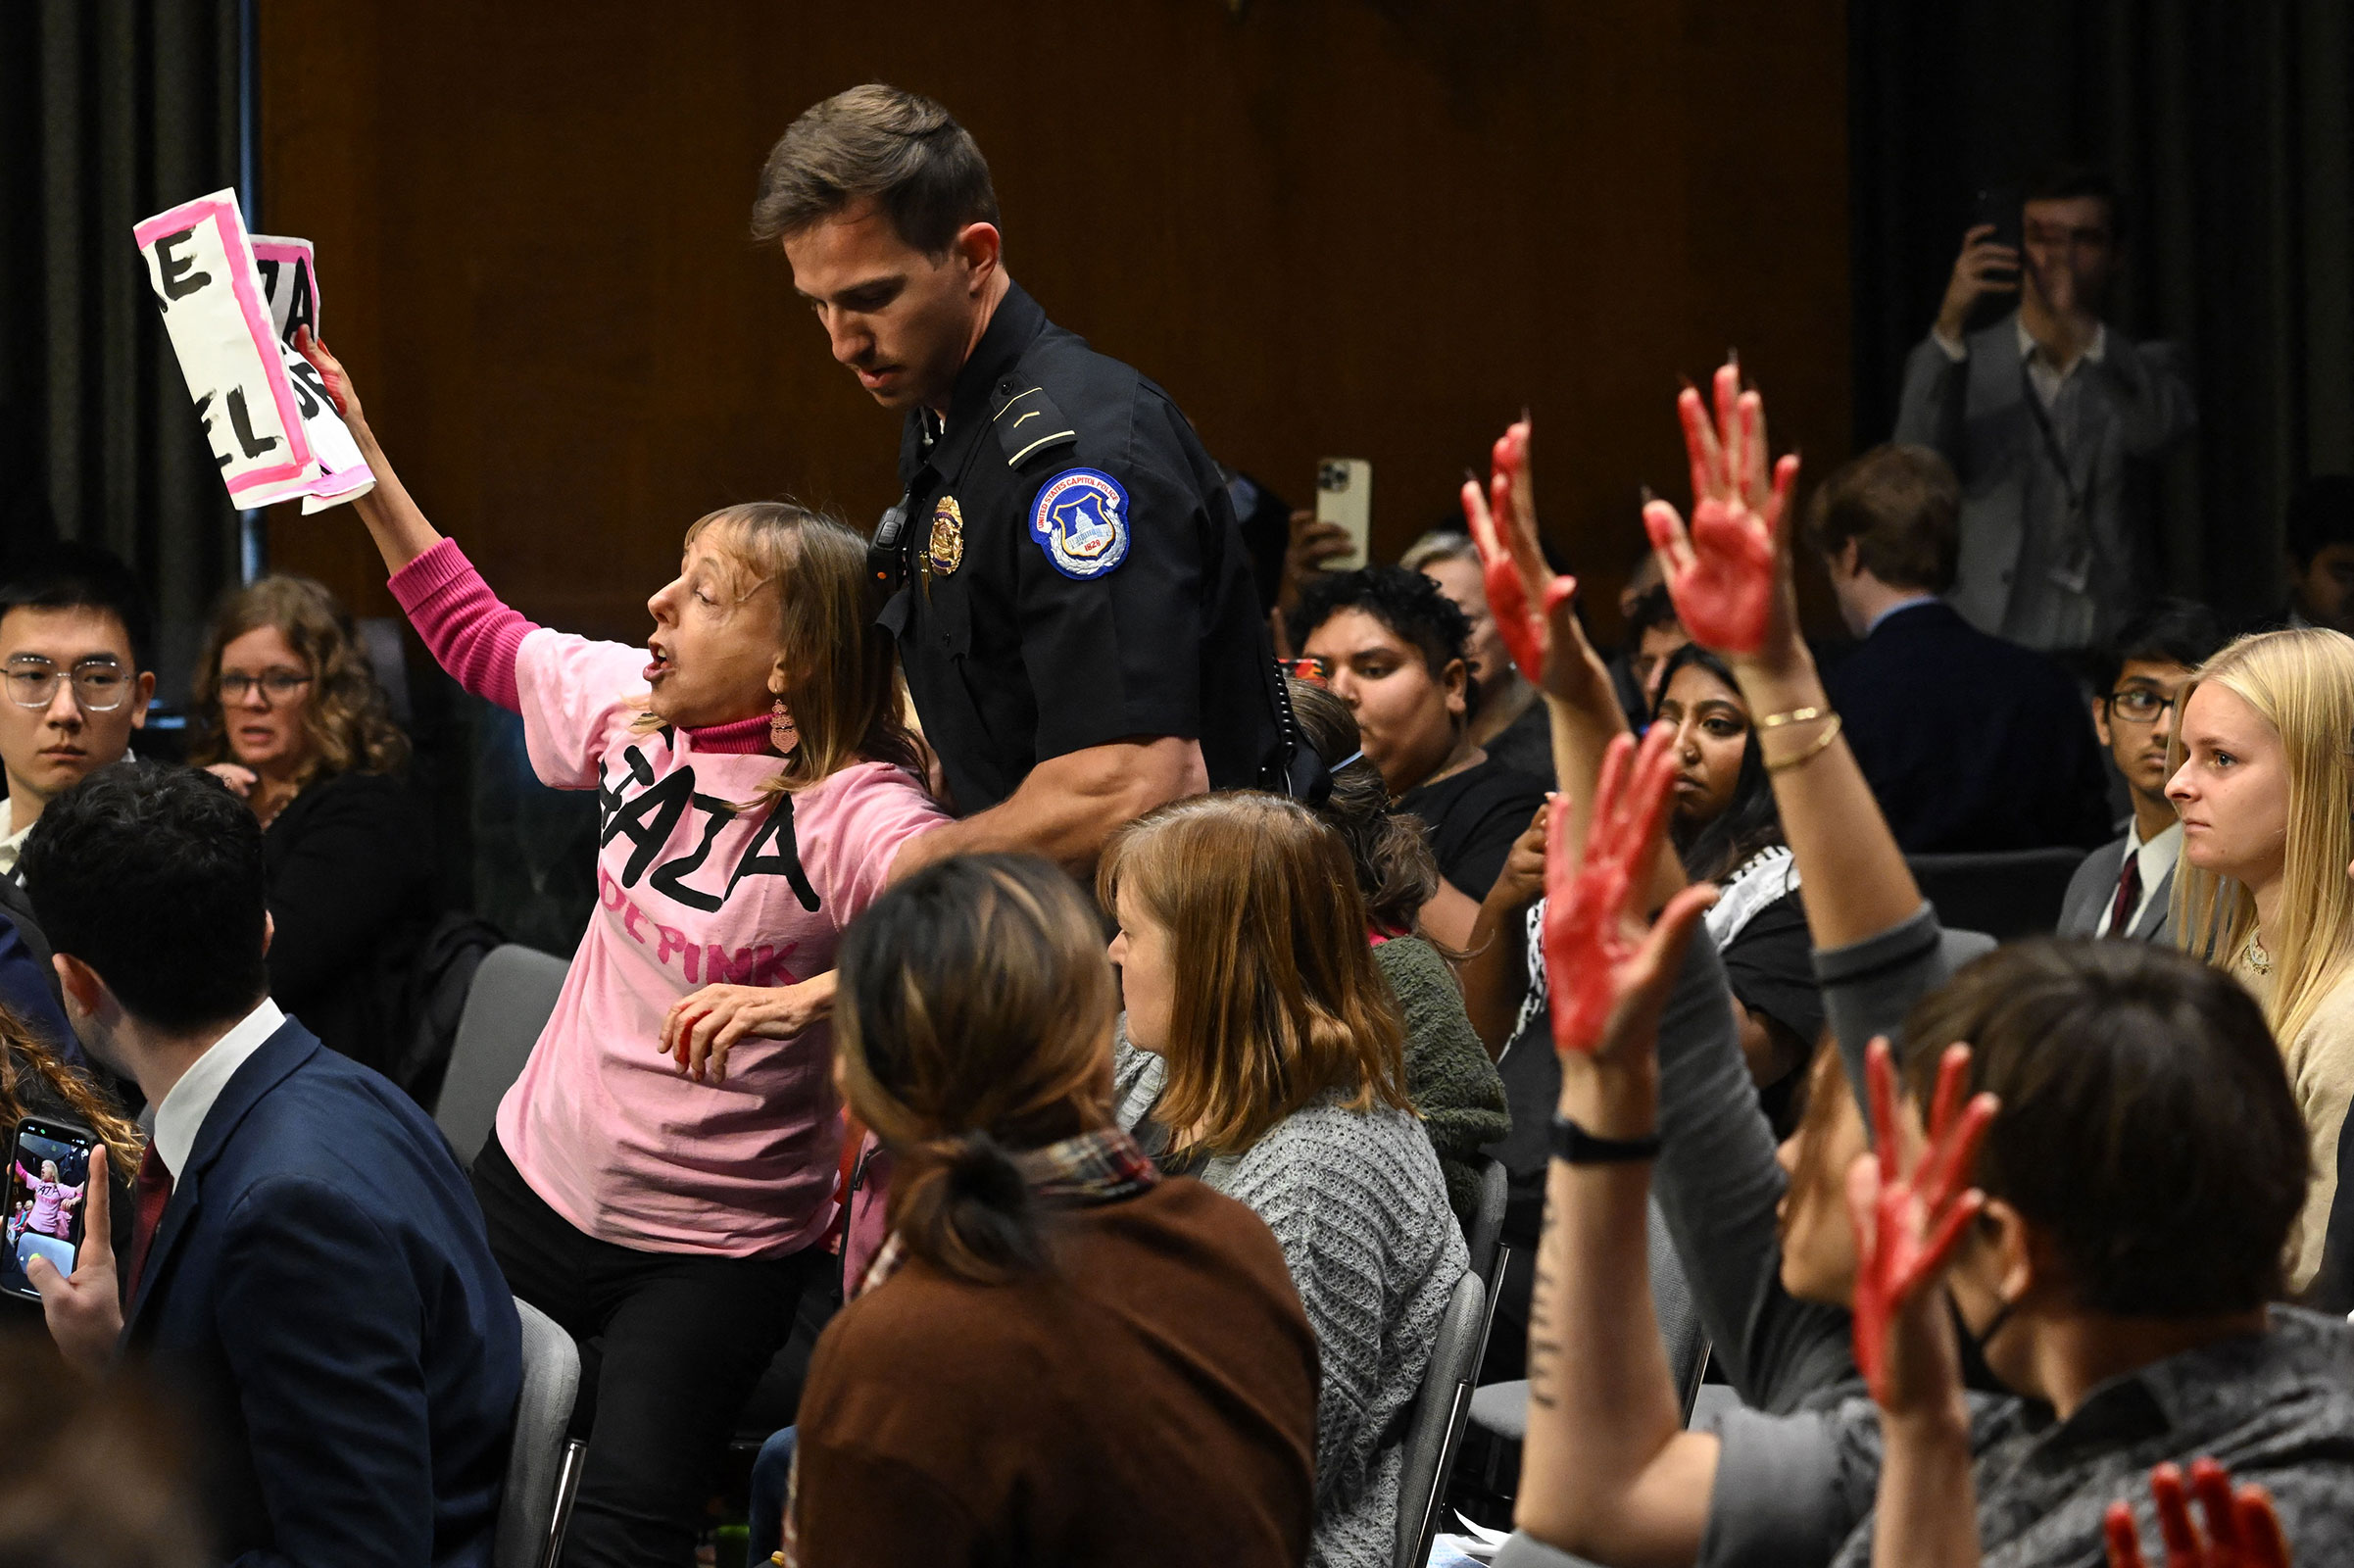 A protester is removed while others show painted hands as US Secretary of State Antony Blinken and Defense Secretary Lloyd Austin testify during a Senate Appropriations Committee hearing to examine the national security supplemental request, on Capitol Hill in Washington, DC, on October 31.